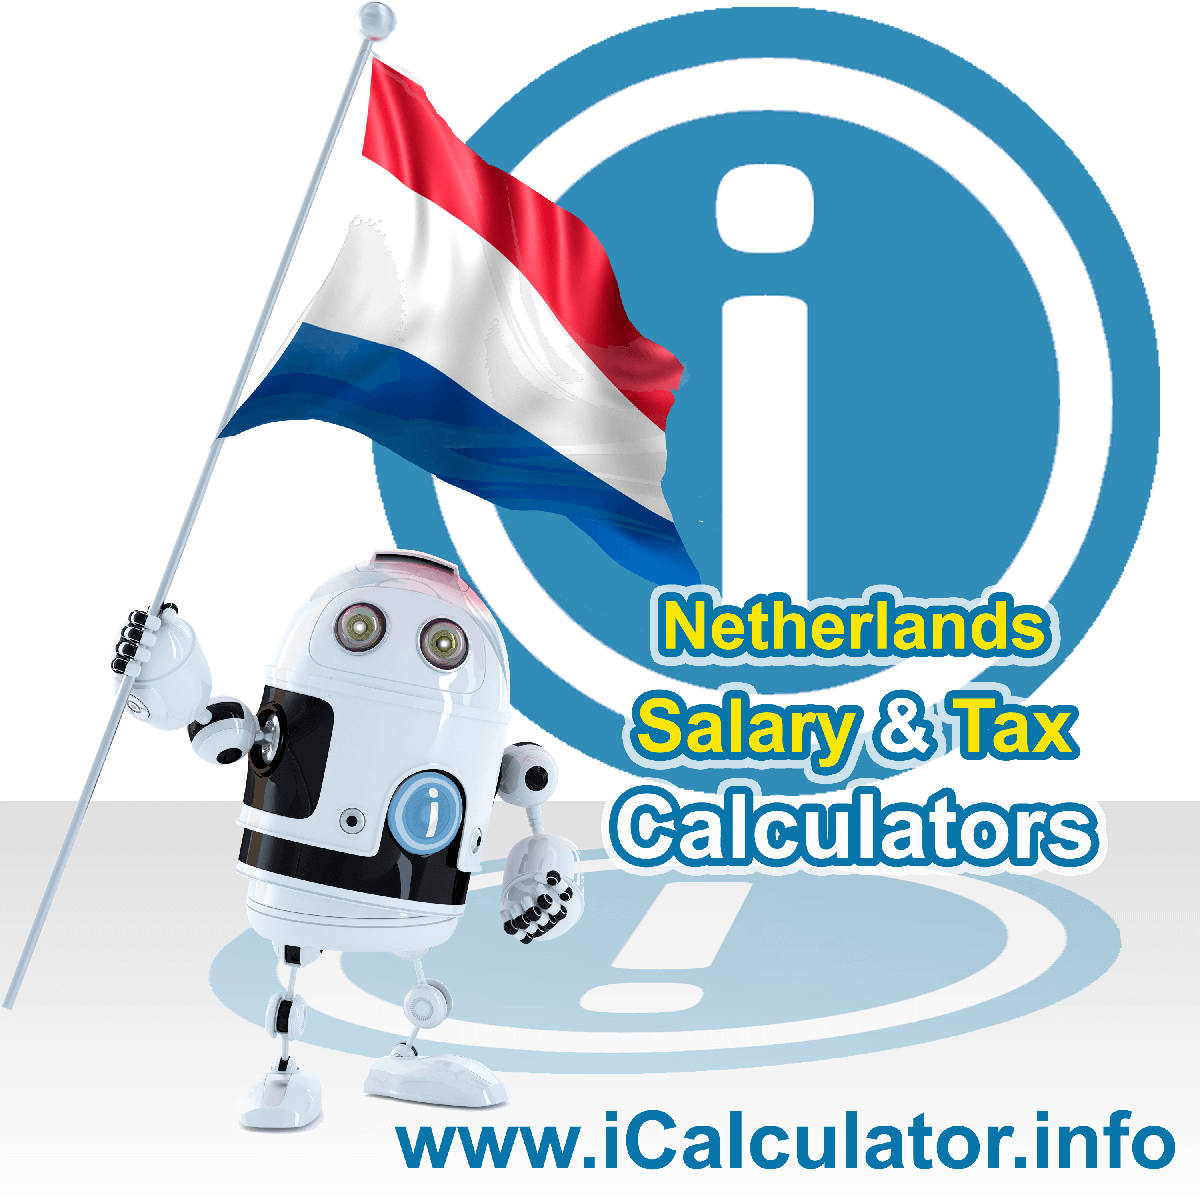 The Netherlands Wage Calculator. This image shows the Netherlands flag and information relating to the tax formula for the Netherlands Tax Calculator